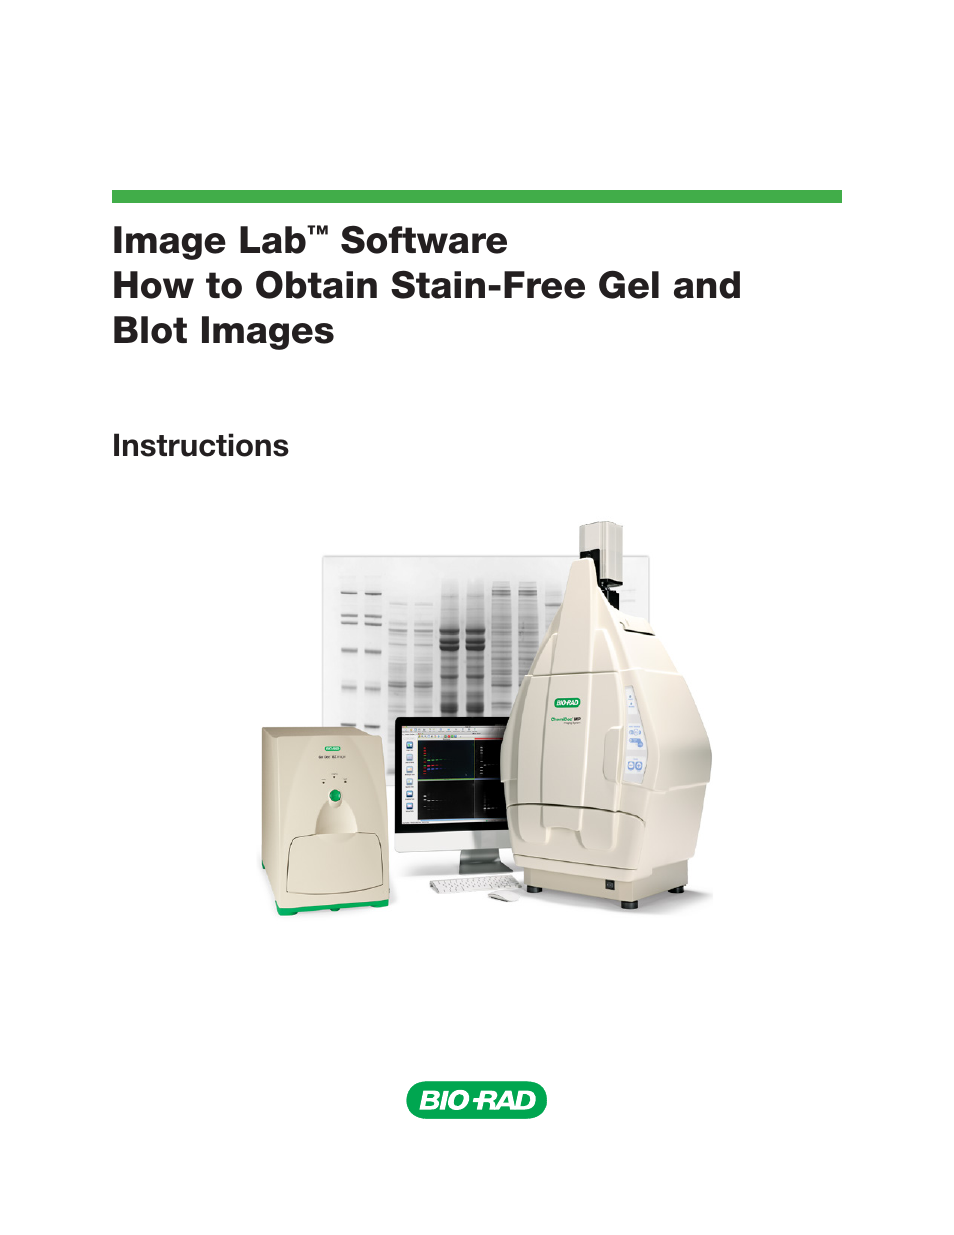 Bio-Rad Gel Doc™ EZ System User Manual | 16 pages | Also for: Gel Doc™ XR+  System, ChemiDoc™ XRS+ System, ChemiDoc™ MP System, ChemiDoc™ Touch Imaging  System, TGX Stain-Free™ FastCast™ Acrylamide Solutions, Criterion Stain  Free ...